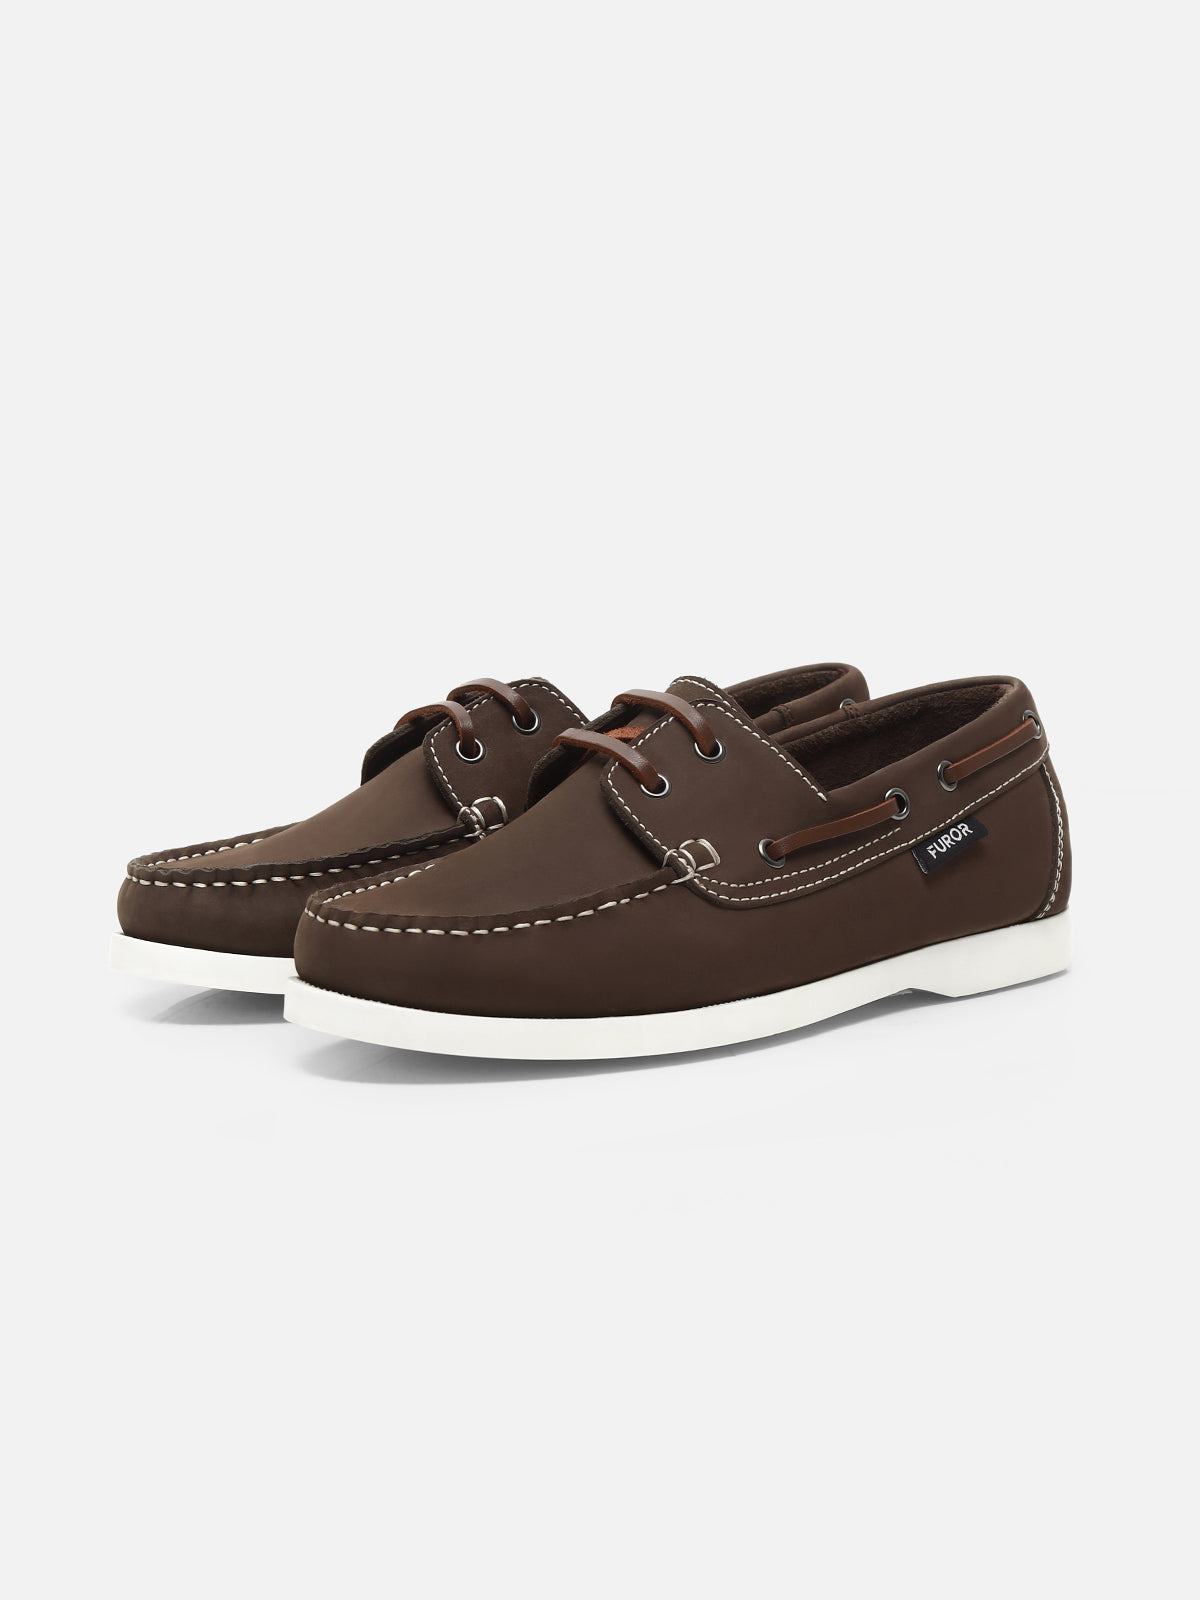 Leather Boat Shoe - FAMS24-034